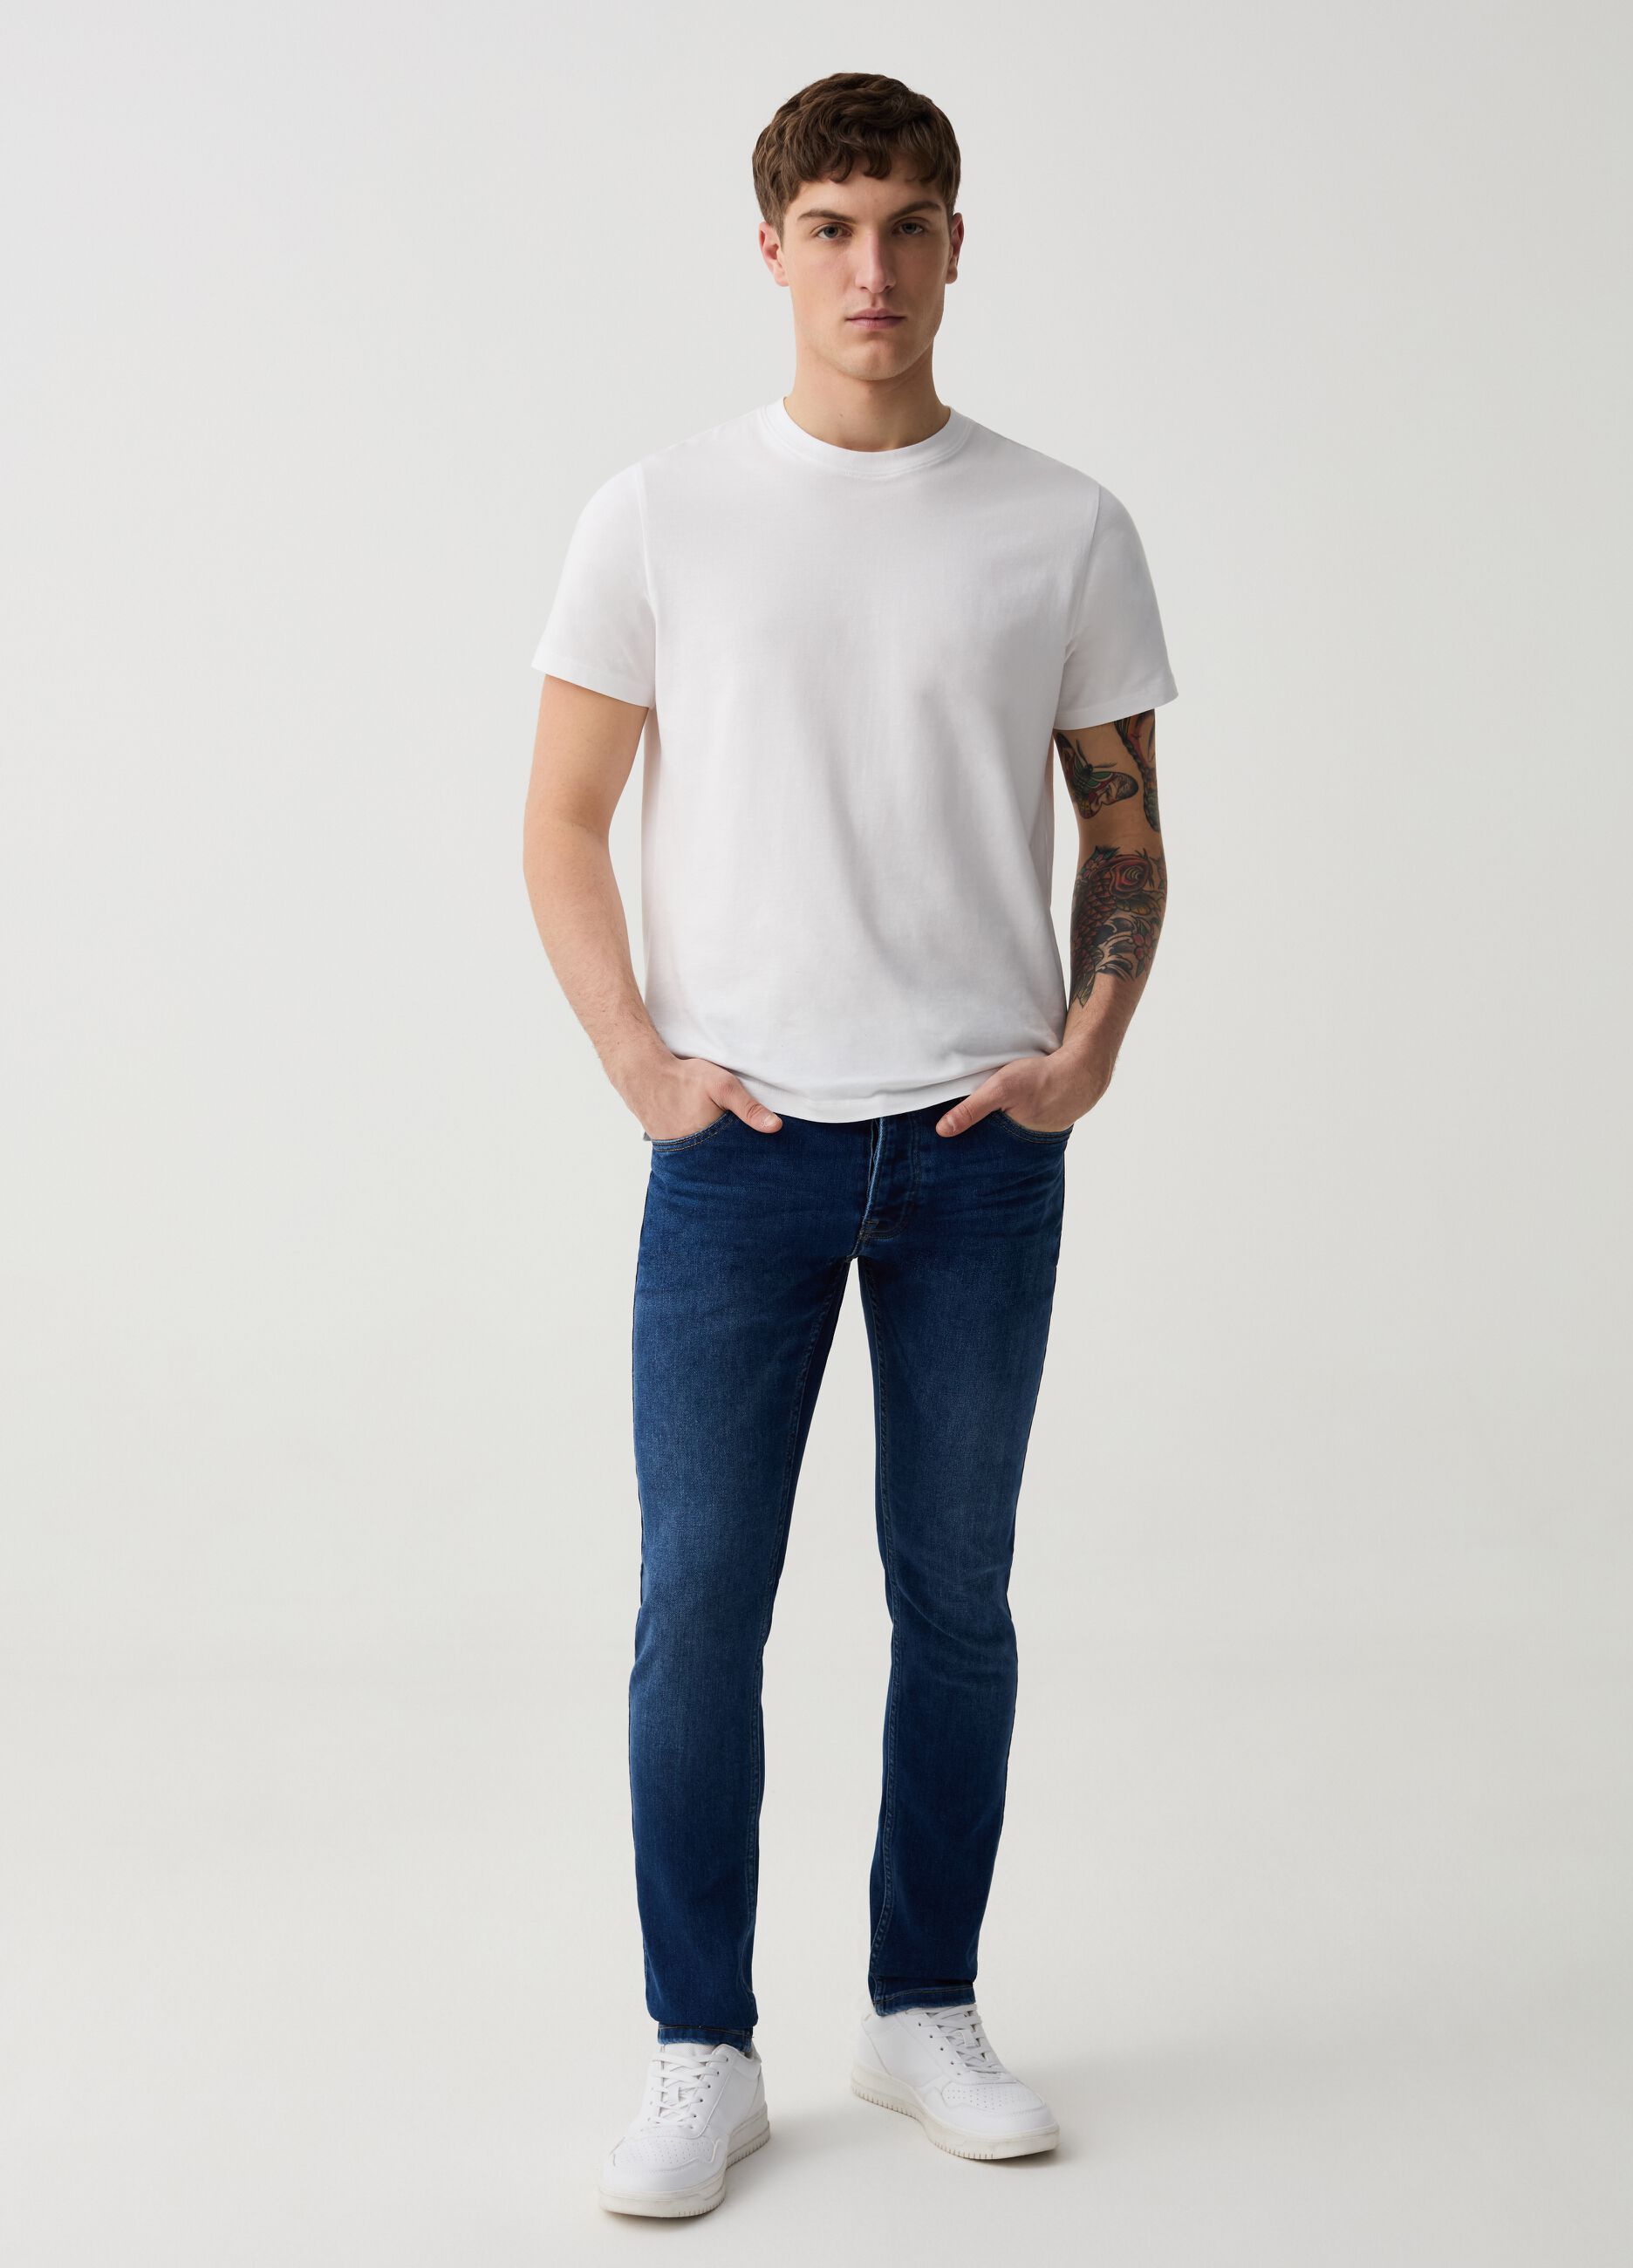 Skinny-fit jeans in Coolmax® fabric